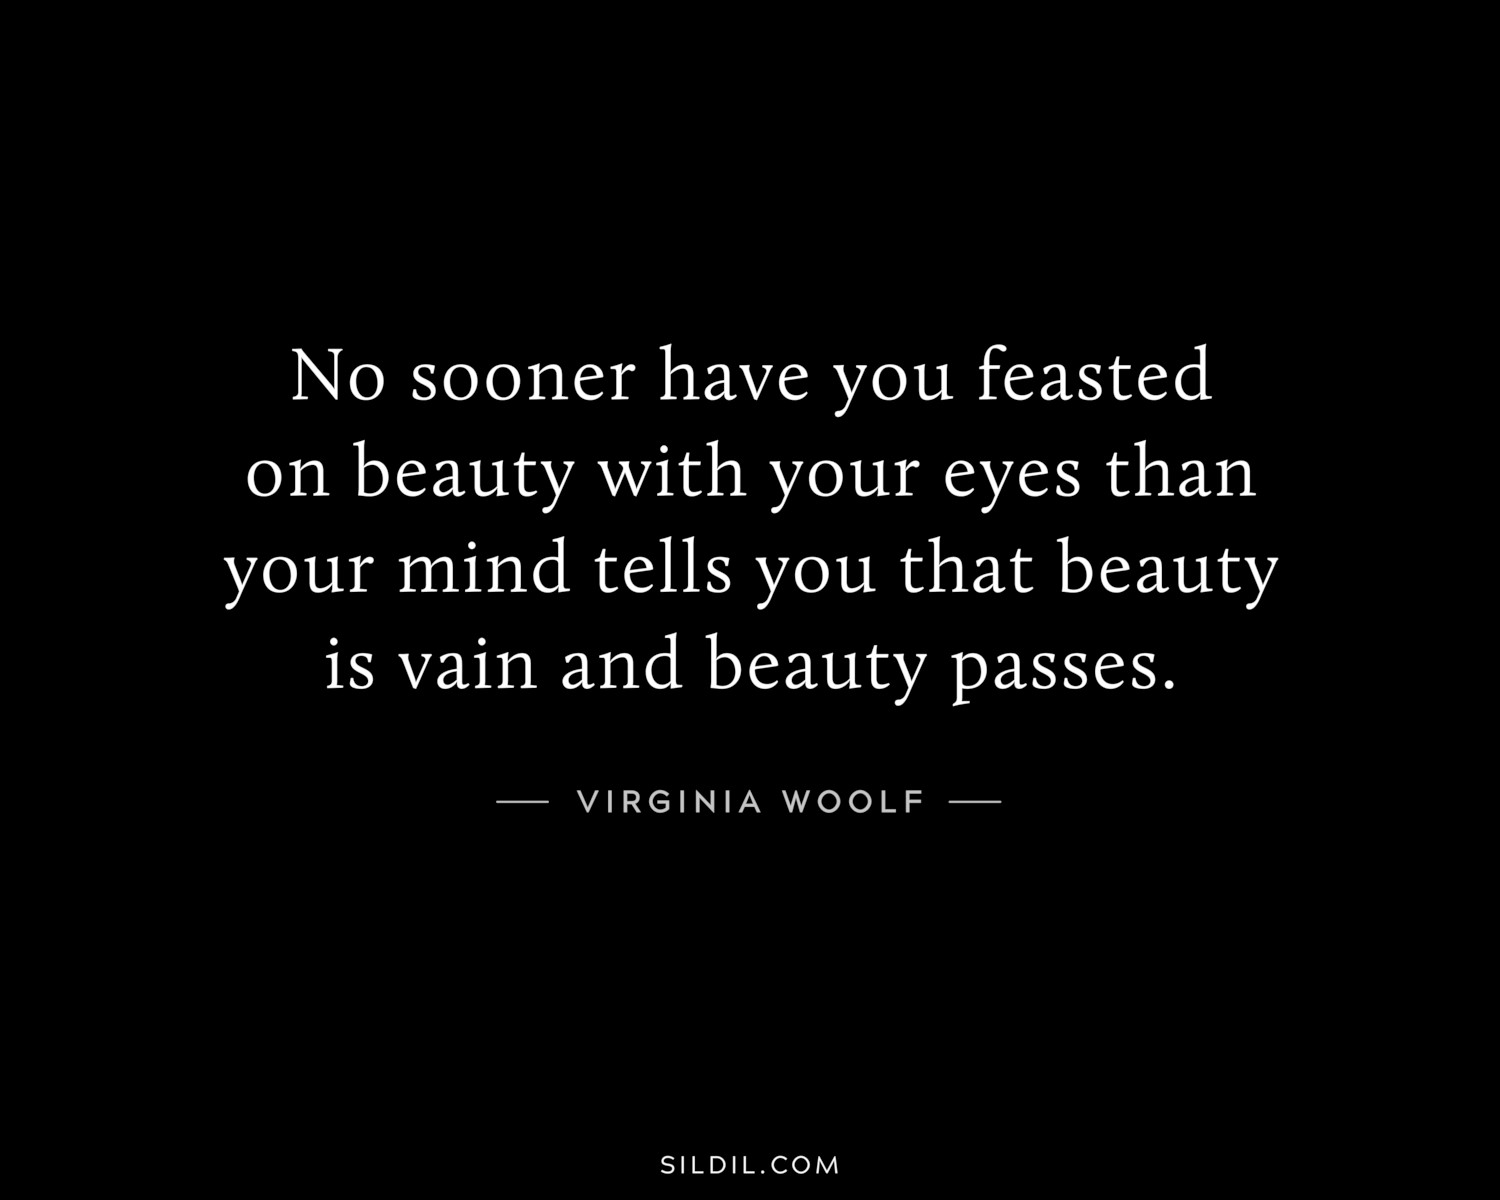 No sooner have you feasted on beauty with your eyes than your mind tells you that beauty is vain and beauty passes.